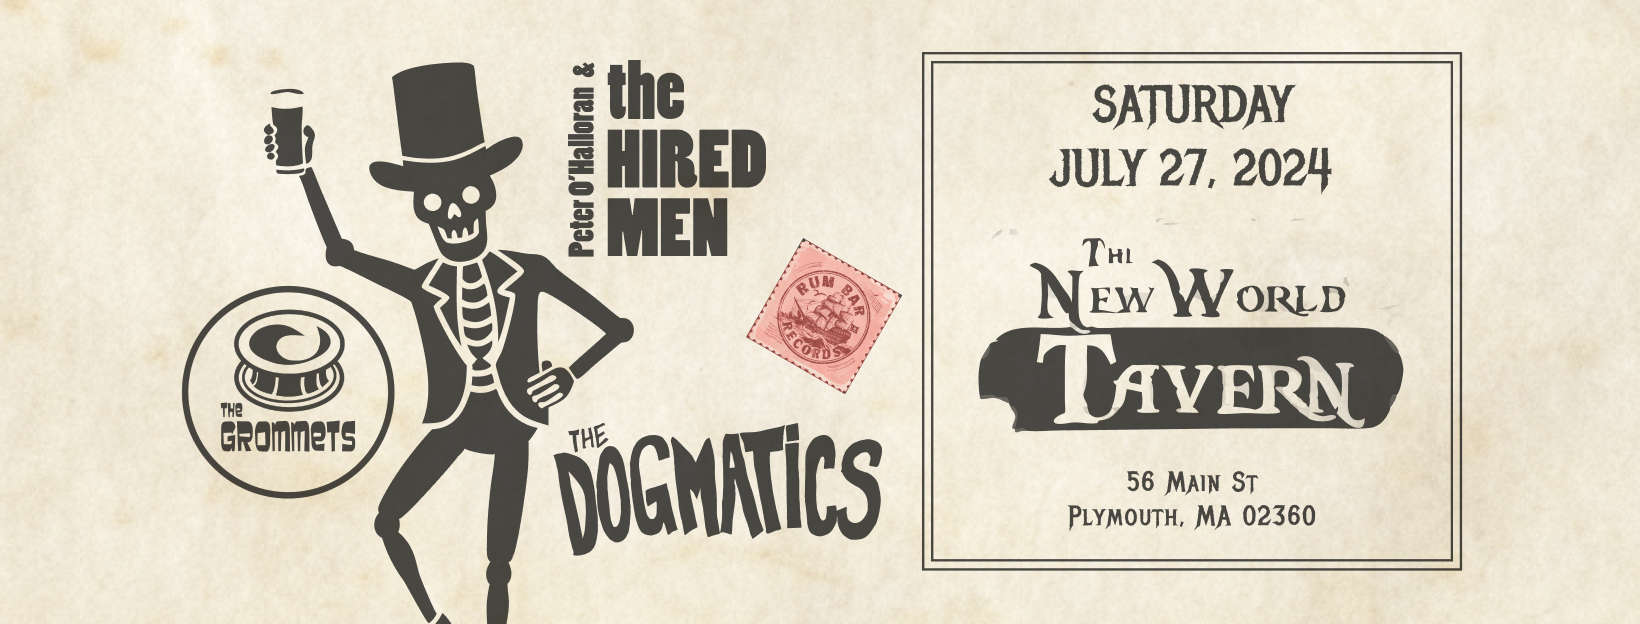 The Dogmatics, The Grommets and The Hired Men at The New World Tavern